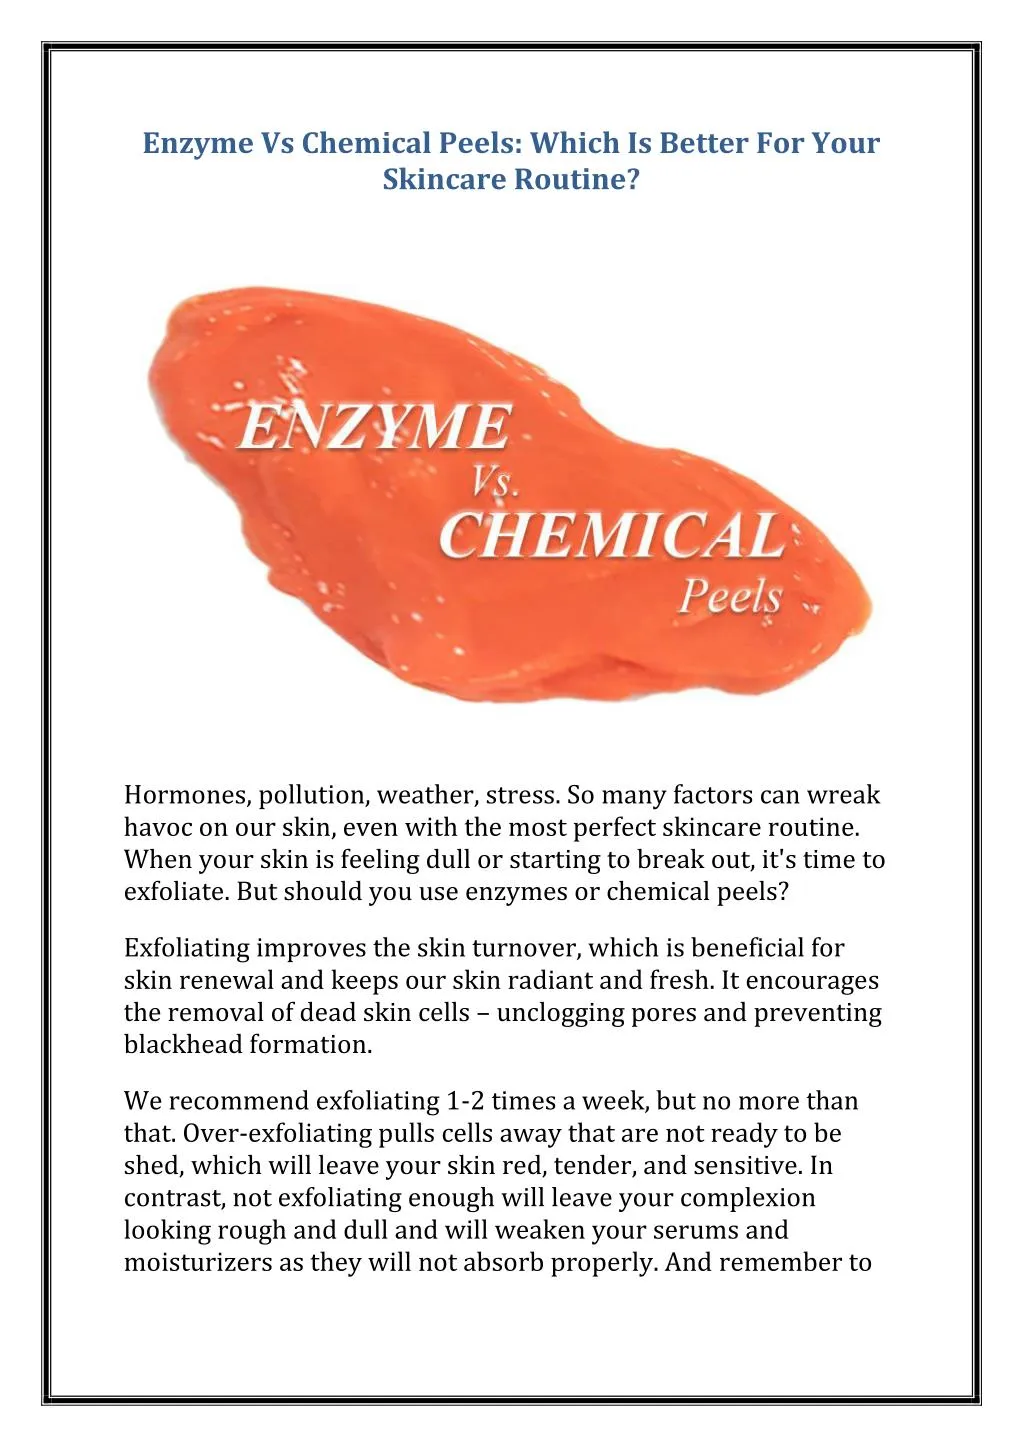 enzyme vs chemical peels which is better for your